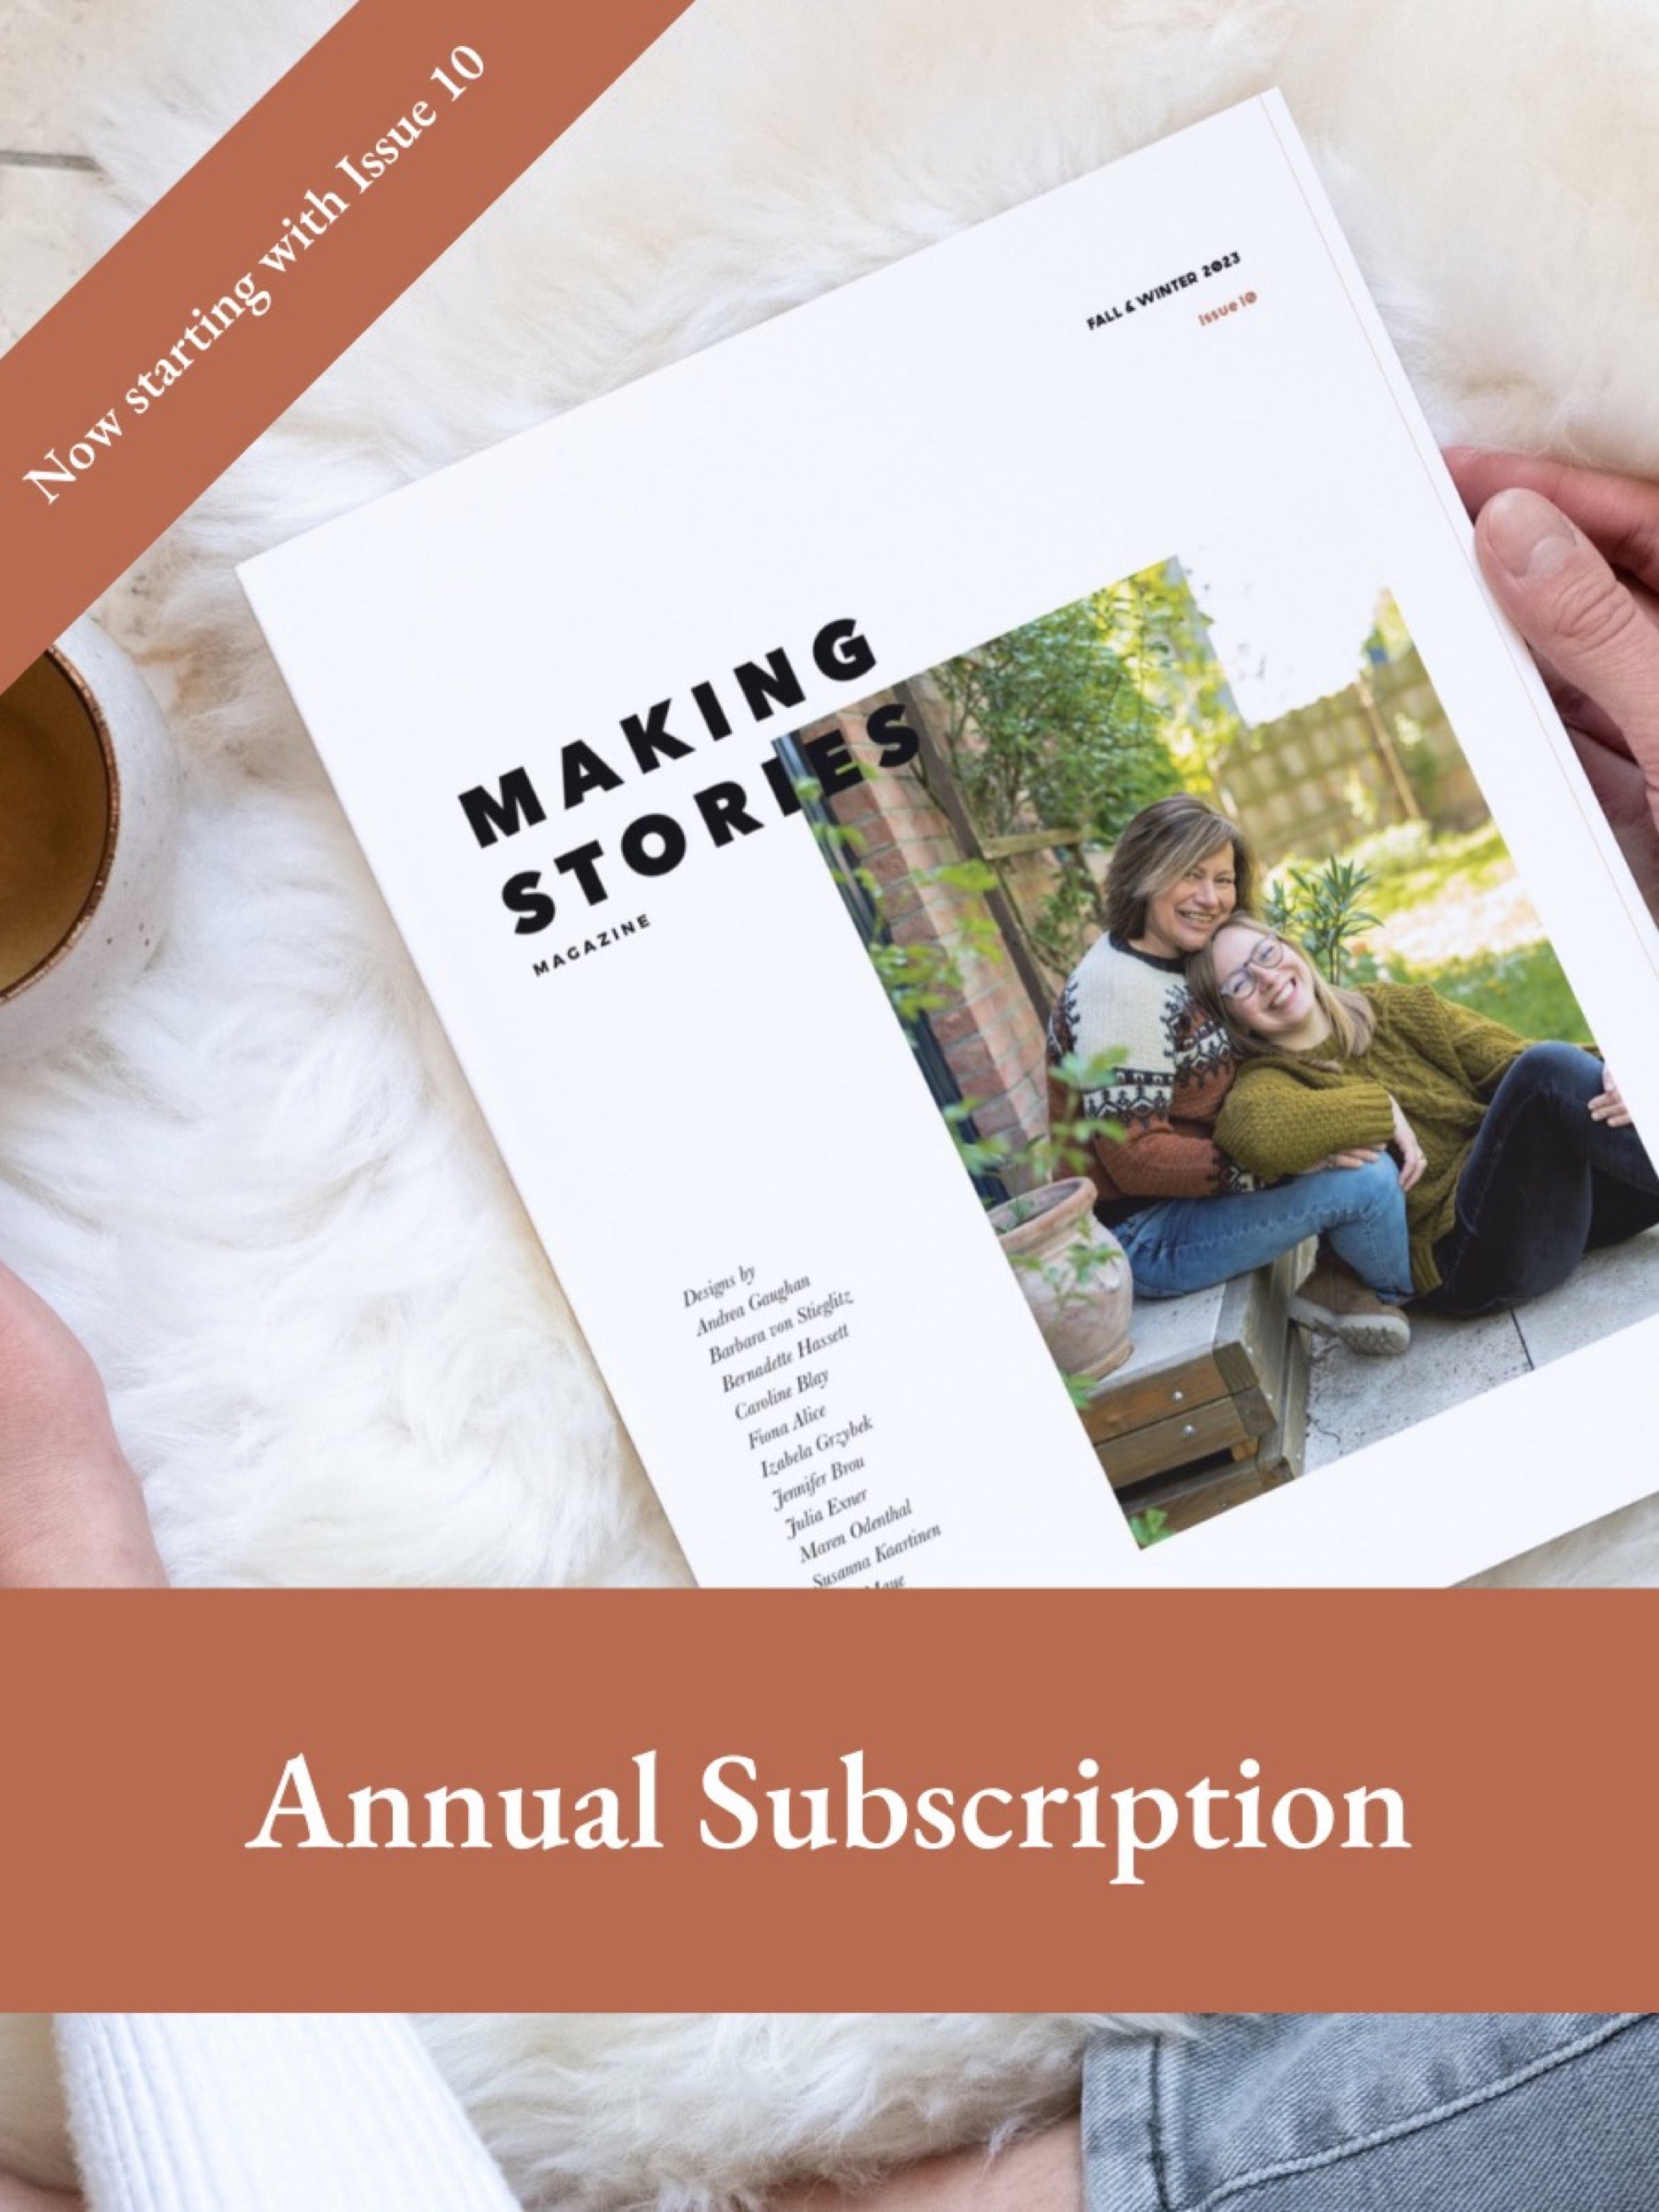 Annual Subscription: Making Stories Magazine